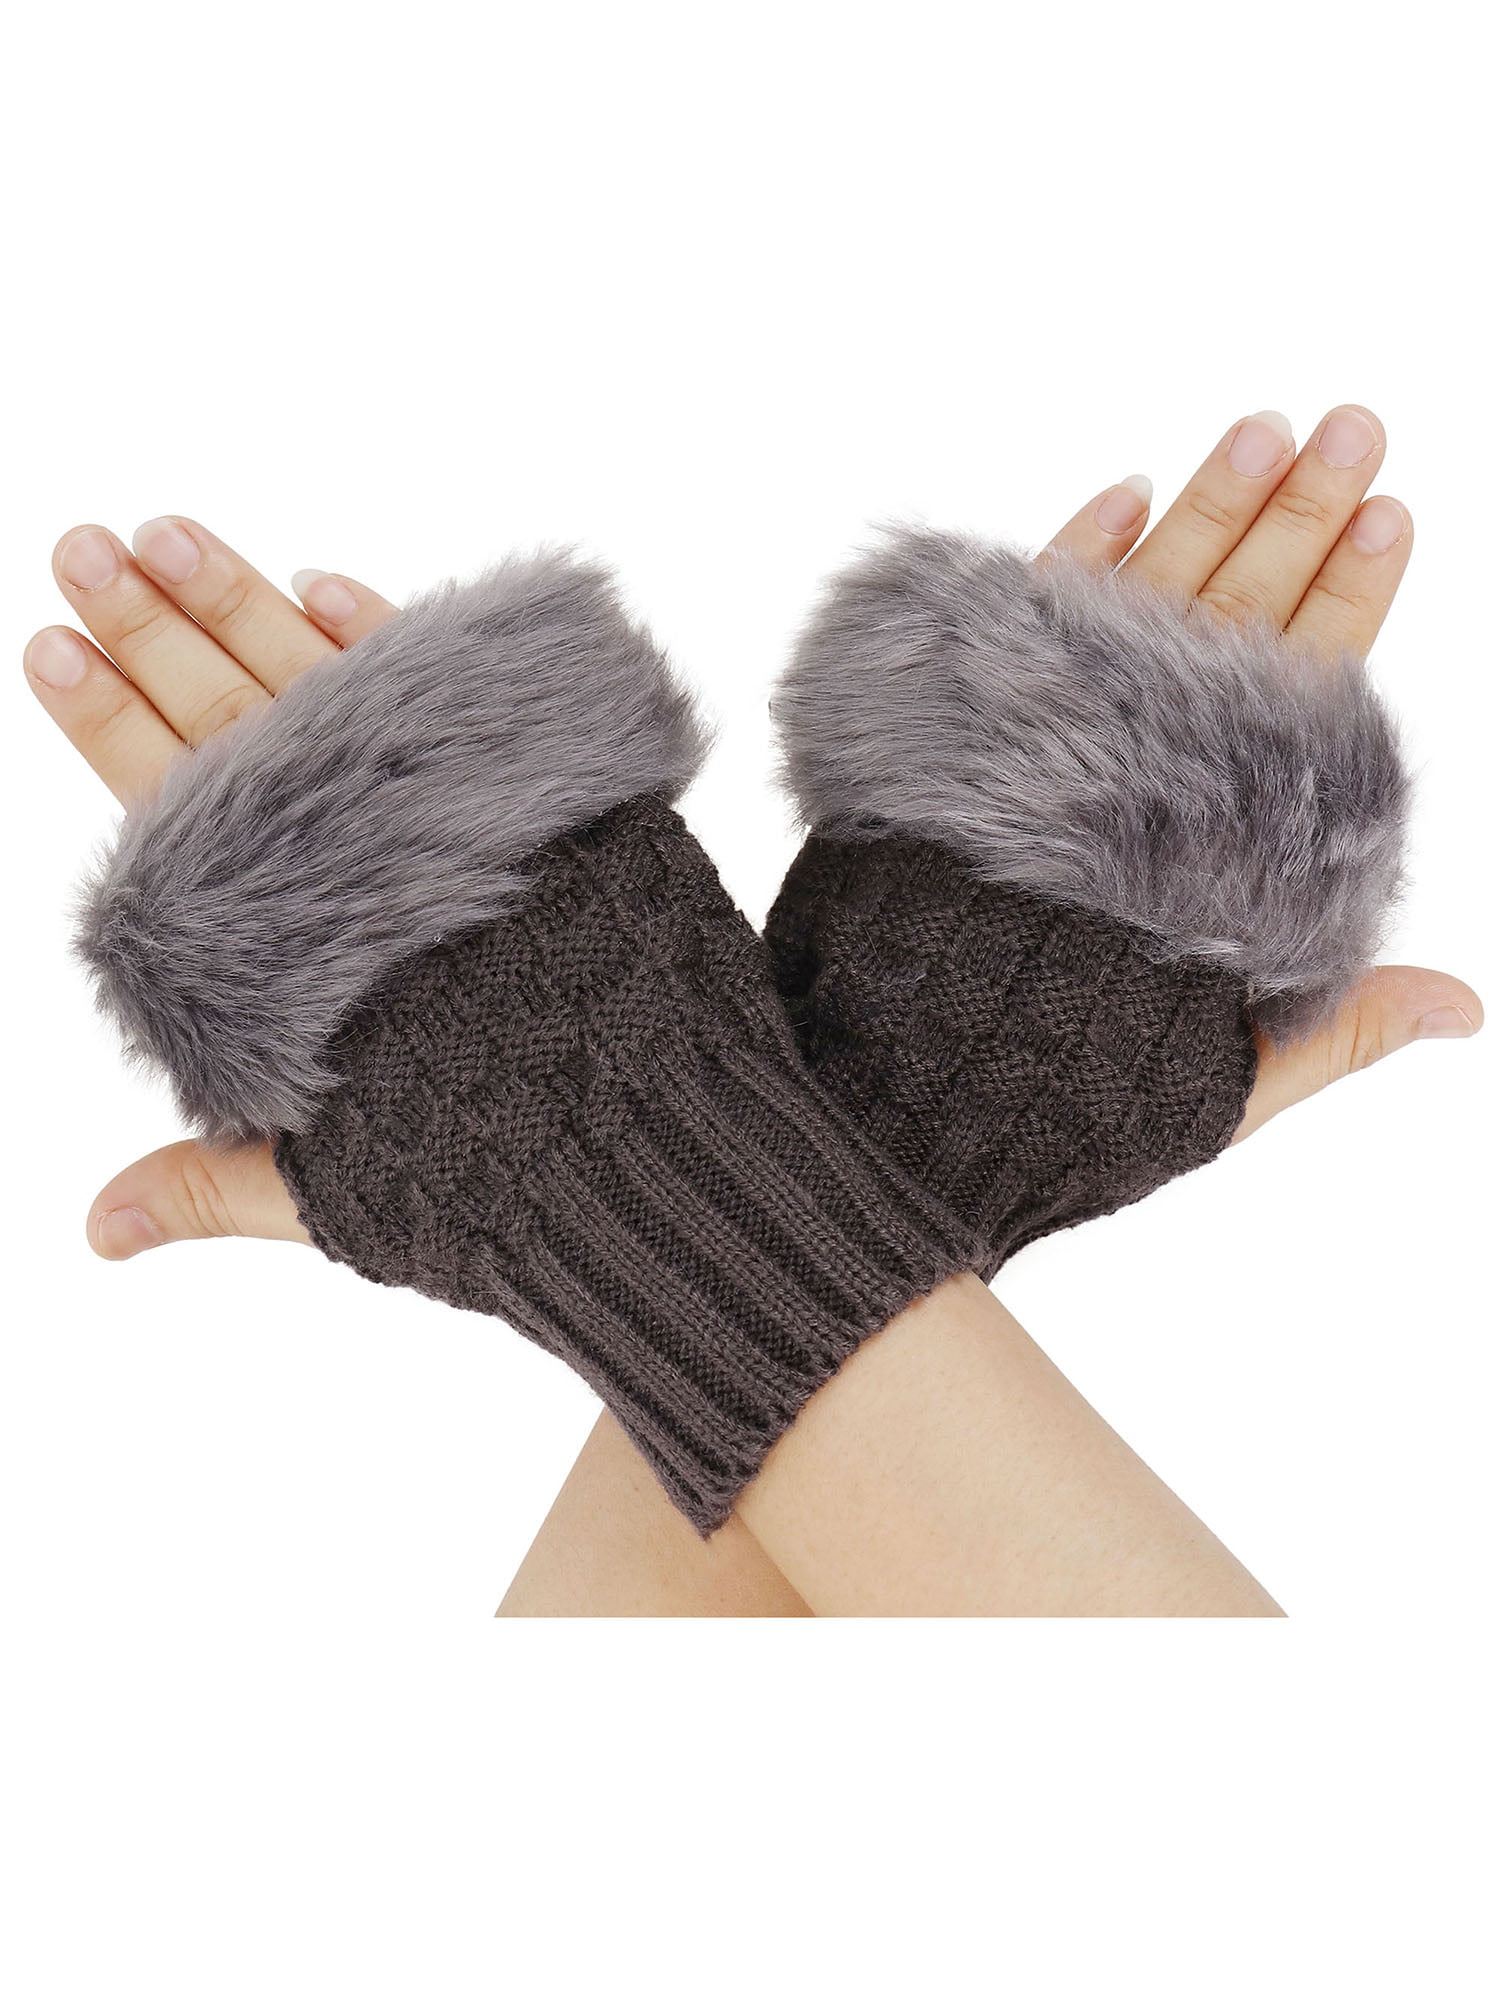 New Winter Women’s Casual Stylish Faux Suede One Size Fluffy Pom Pom Gloves 